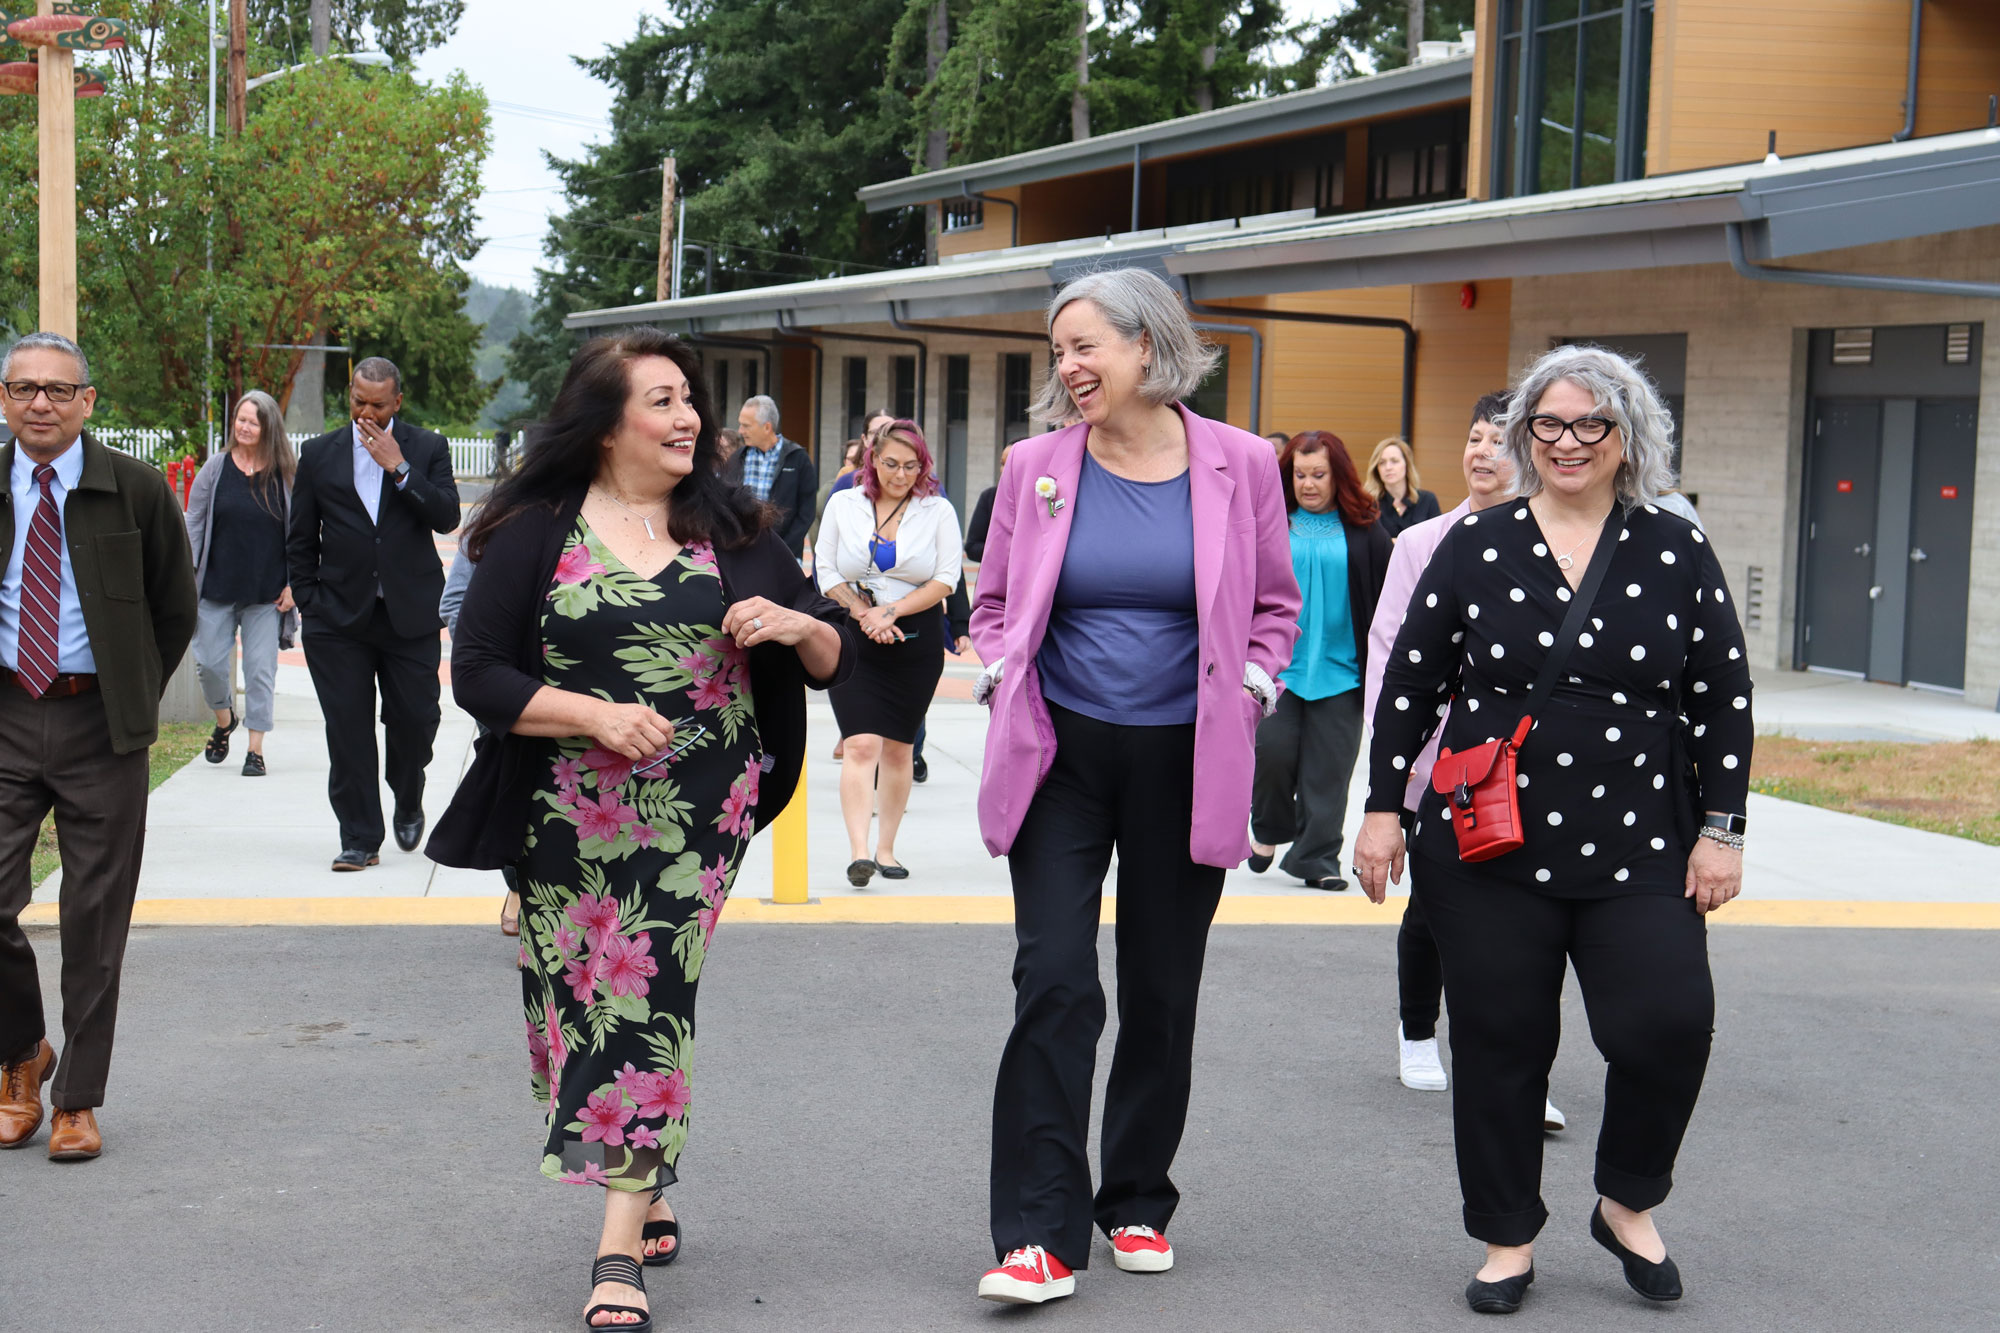 Cheryl Miller of the Port Gamble S'Klallam Tribe leads FNCS Deputy Under Secretary Stacy Dean and DSHS Deputy Chief of Staff Marirose Piciucco on an outdoor walking tour